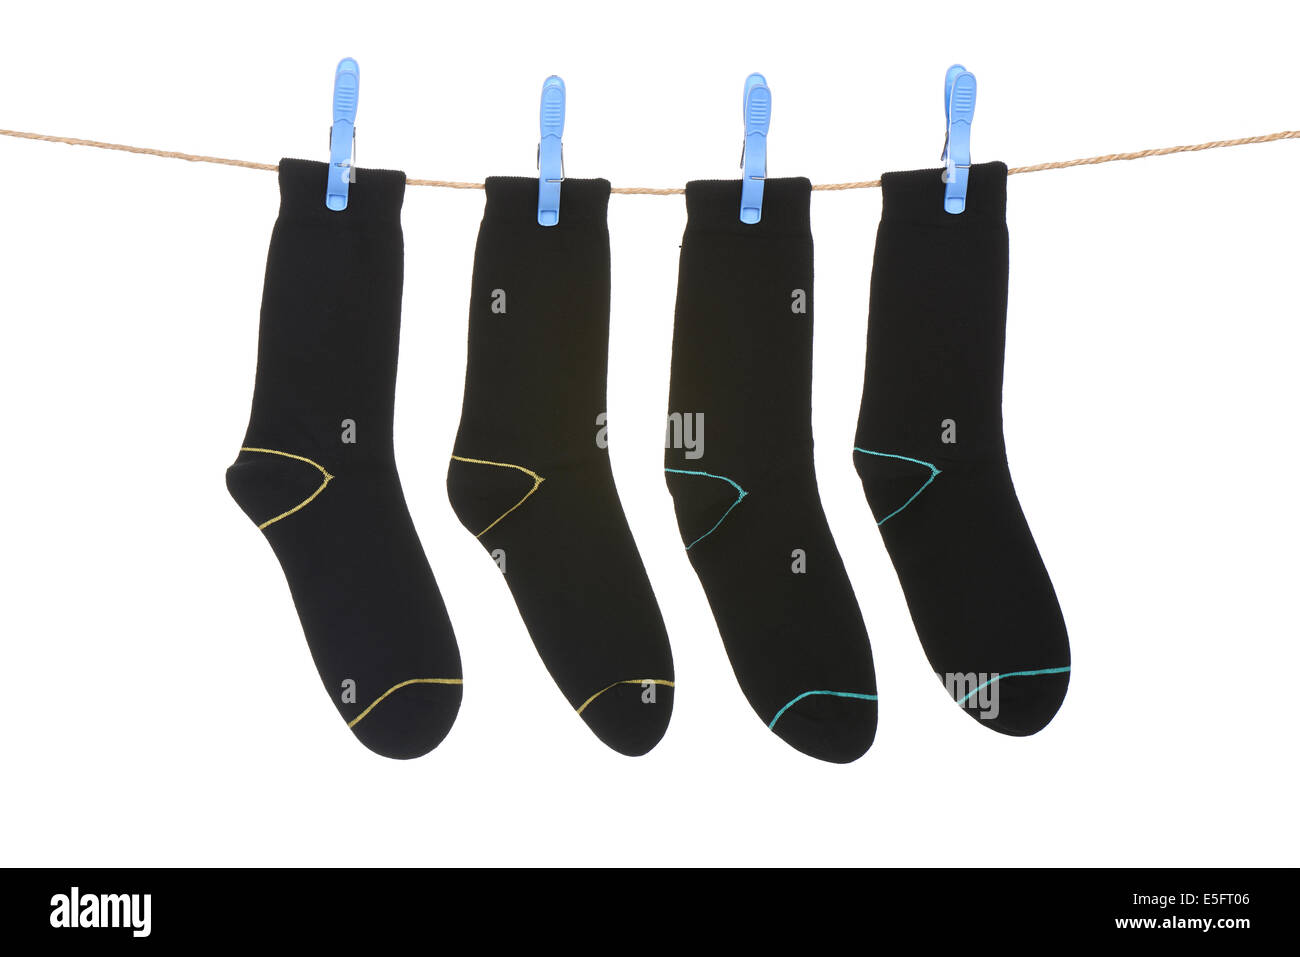 socks hanging to dry over white background Stock Photo